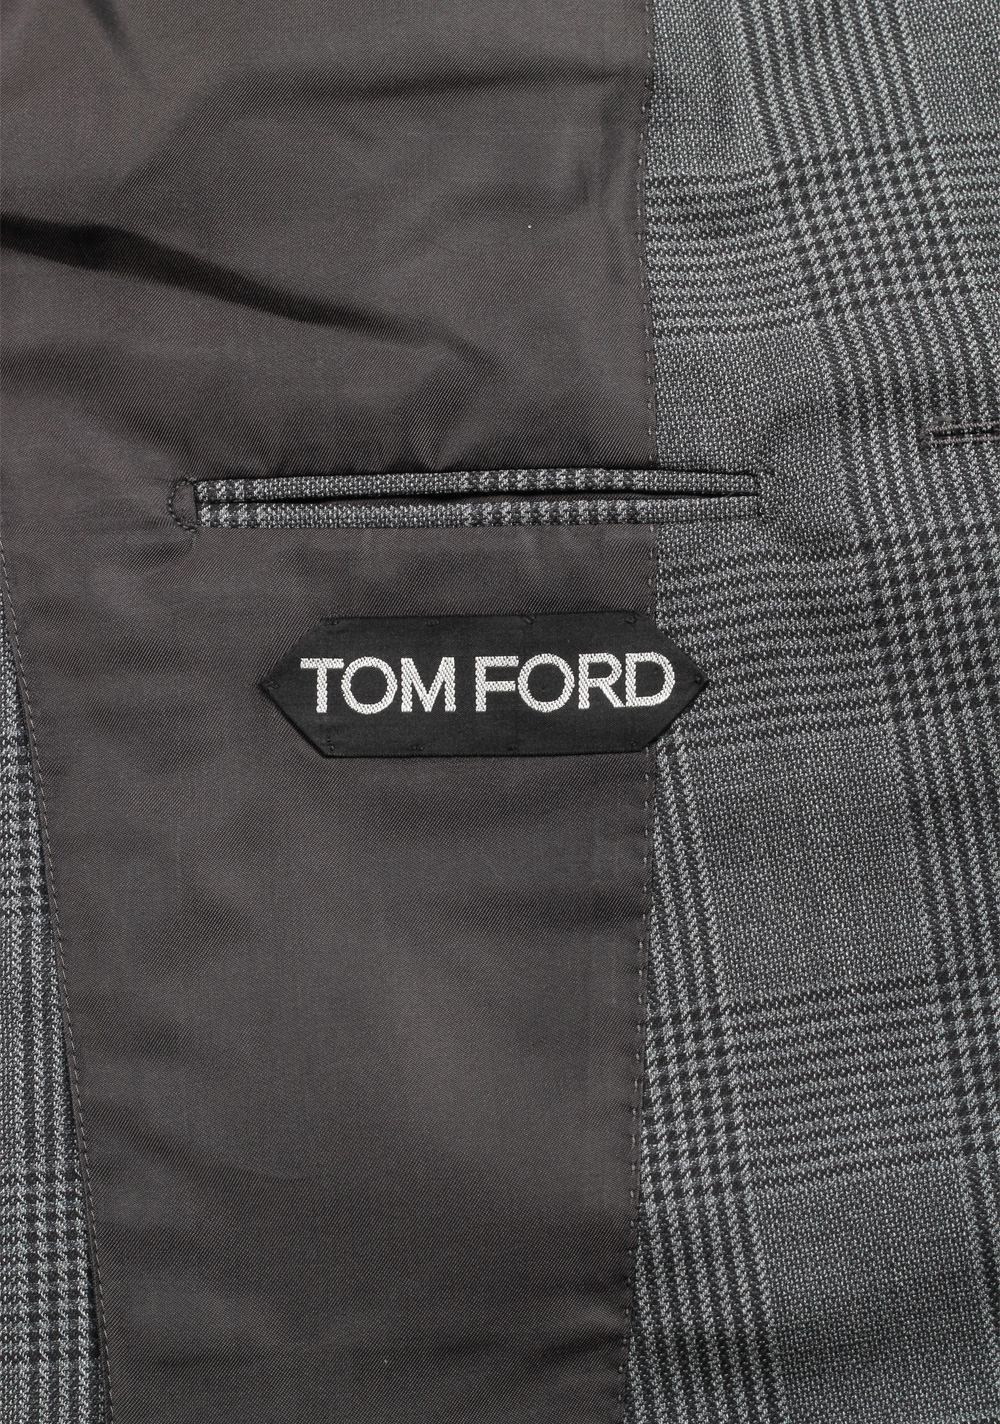 TOM FORD Shelton Checked Gray Sport Coat Size 48 / 38R U.S. In Wool Silk | Costume Limité